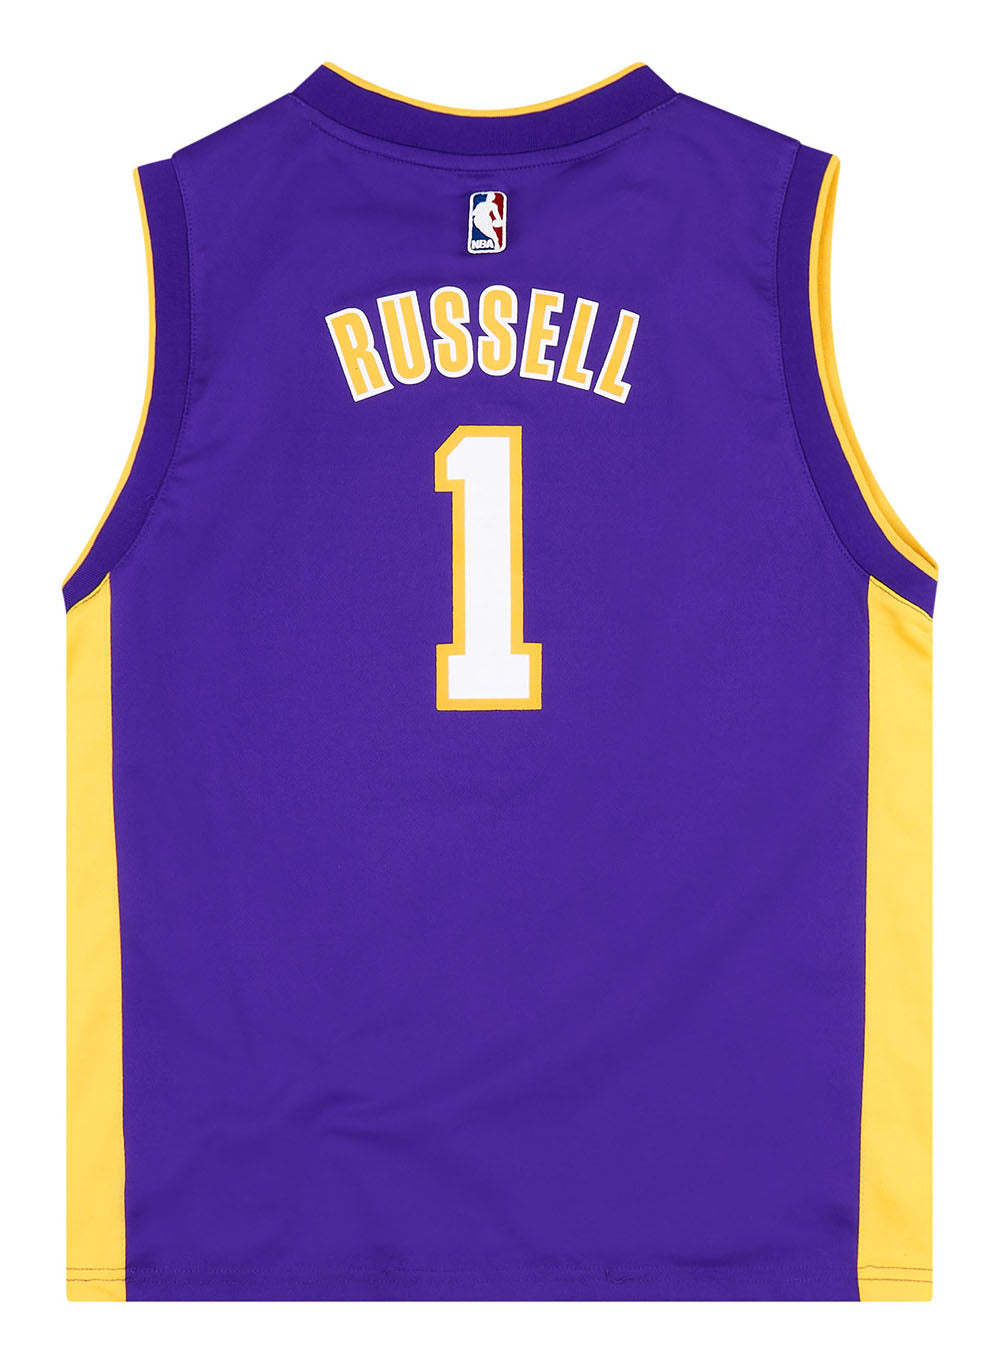 2015-17 LA LAKERS RUSSELL #1 ADIDAS JERSEY (AWAY) Y